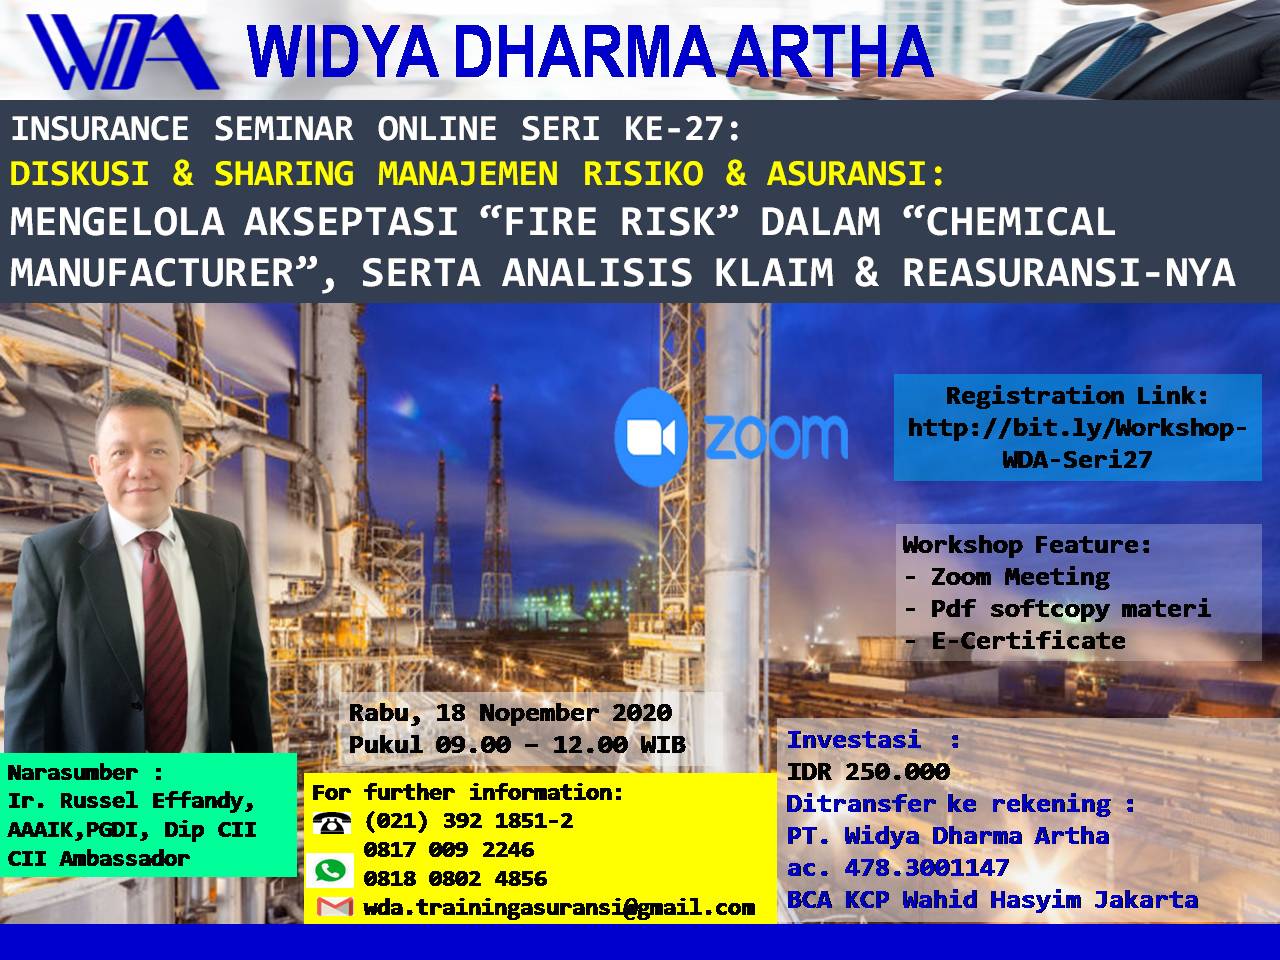 wda-chemical-manufacturer-risks-and-insurance-18-11-2020